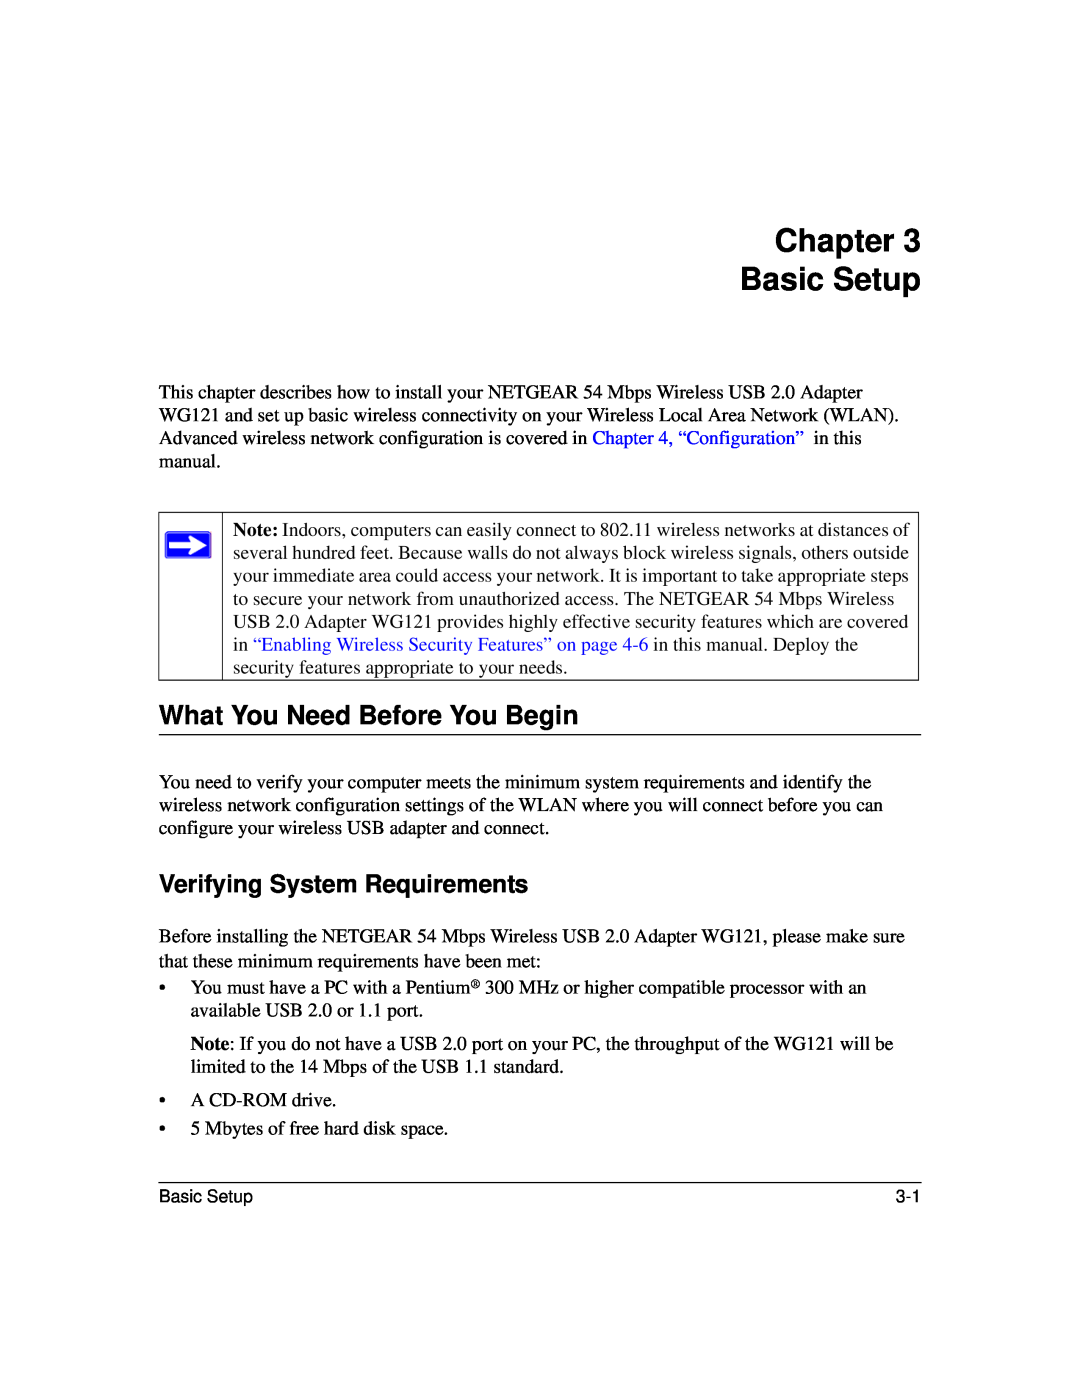 NETGEAR WG121 user manual Chapter Basic Setup, What You Need Before You Begin, Verifying System Requirements 